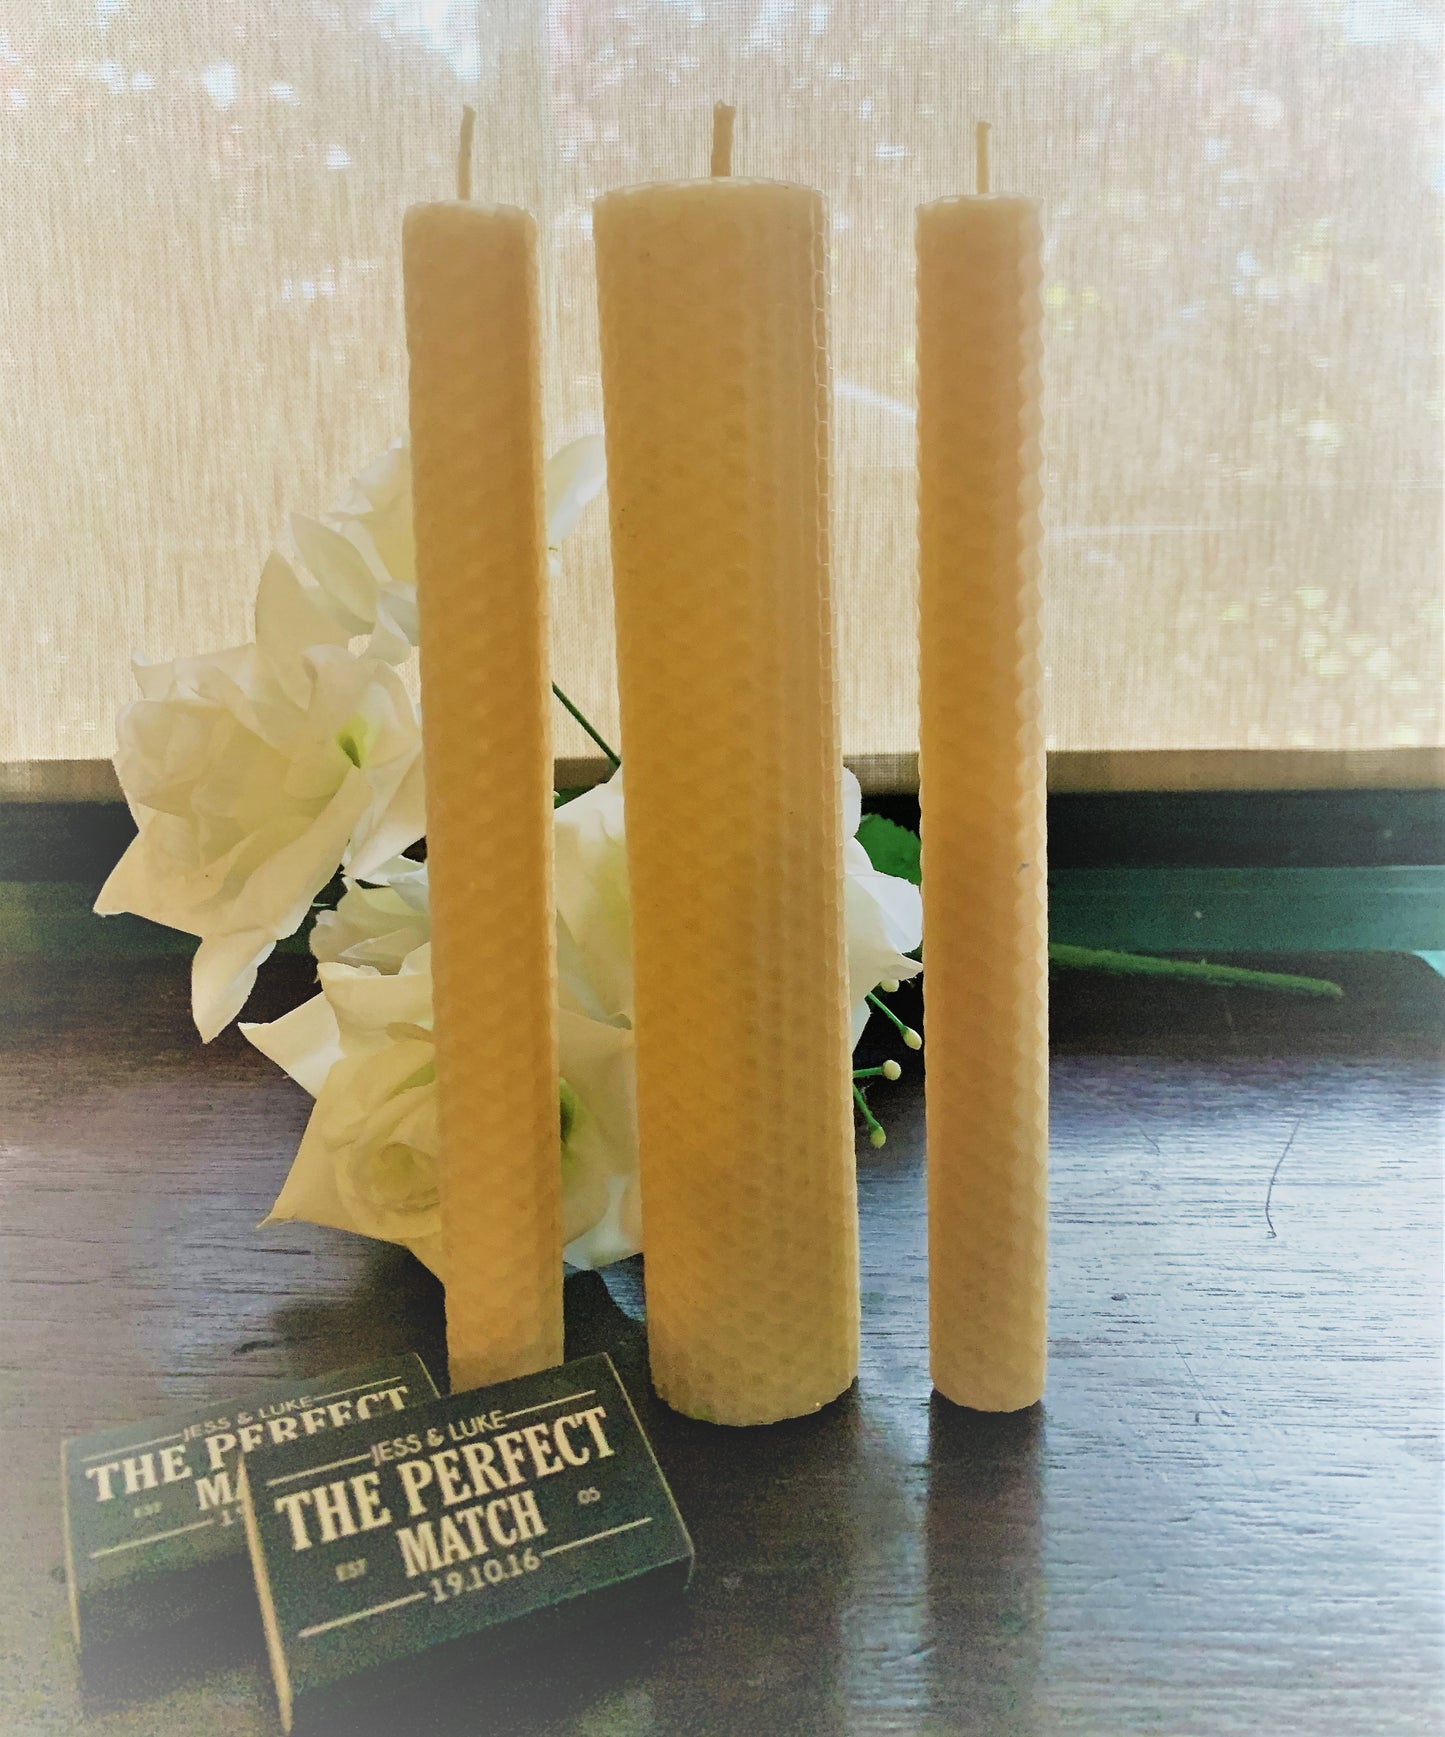 Unity candle set for a romantic wedding - Ceremony pillar and taper style candles